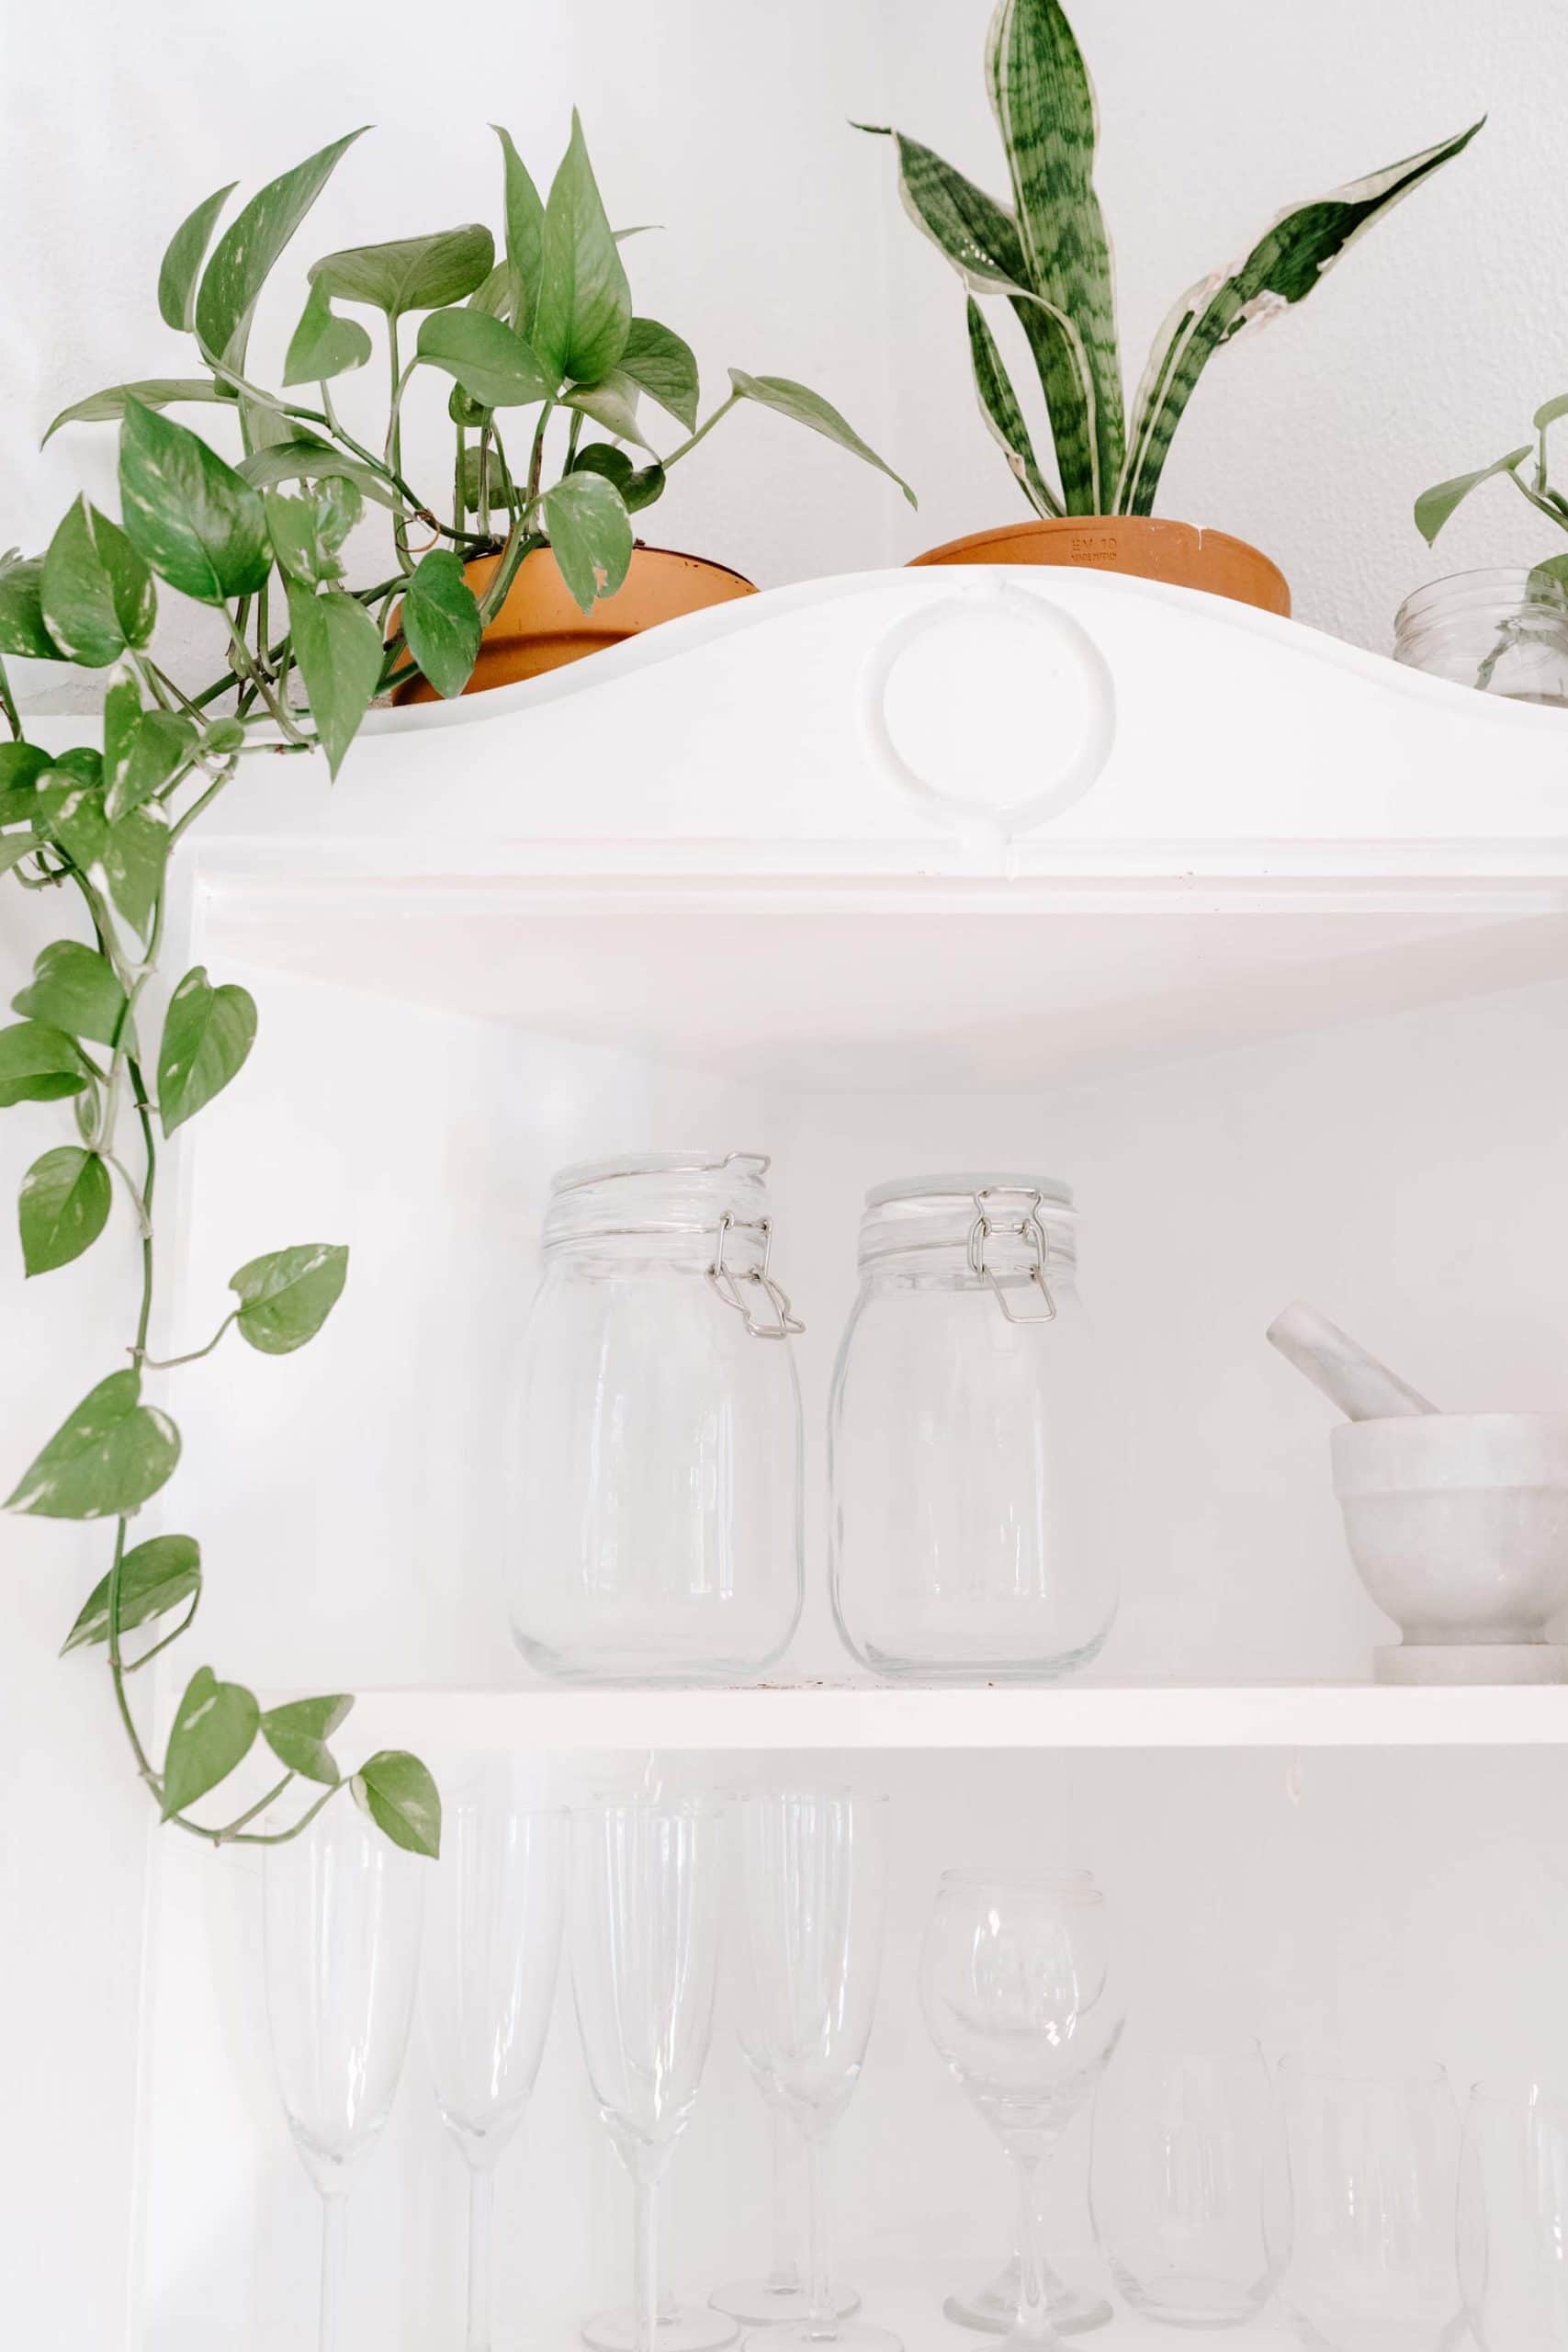 Using mason jars as storage for your dry goods